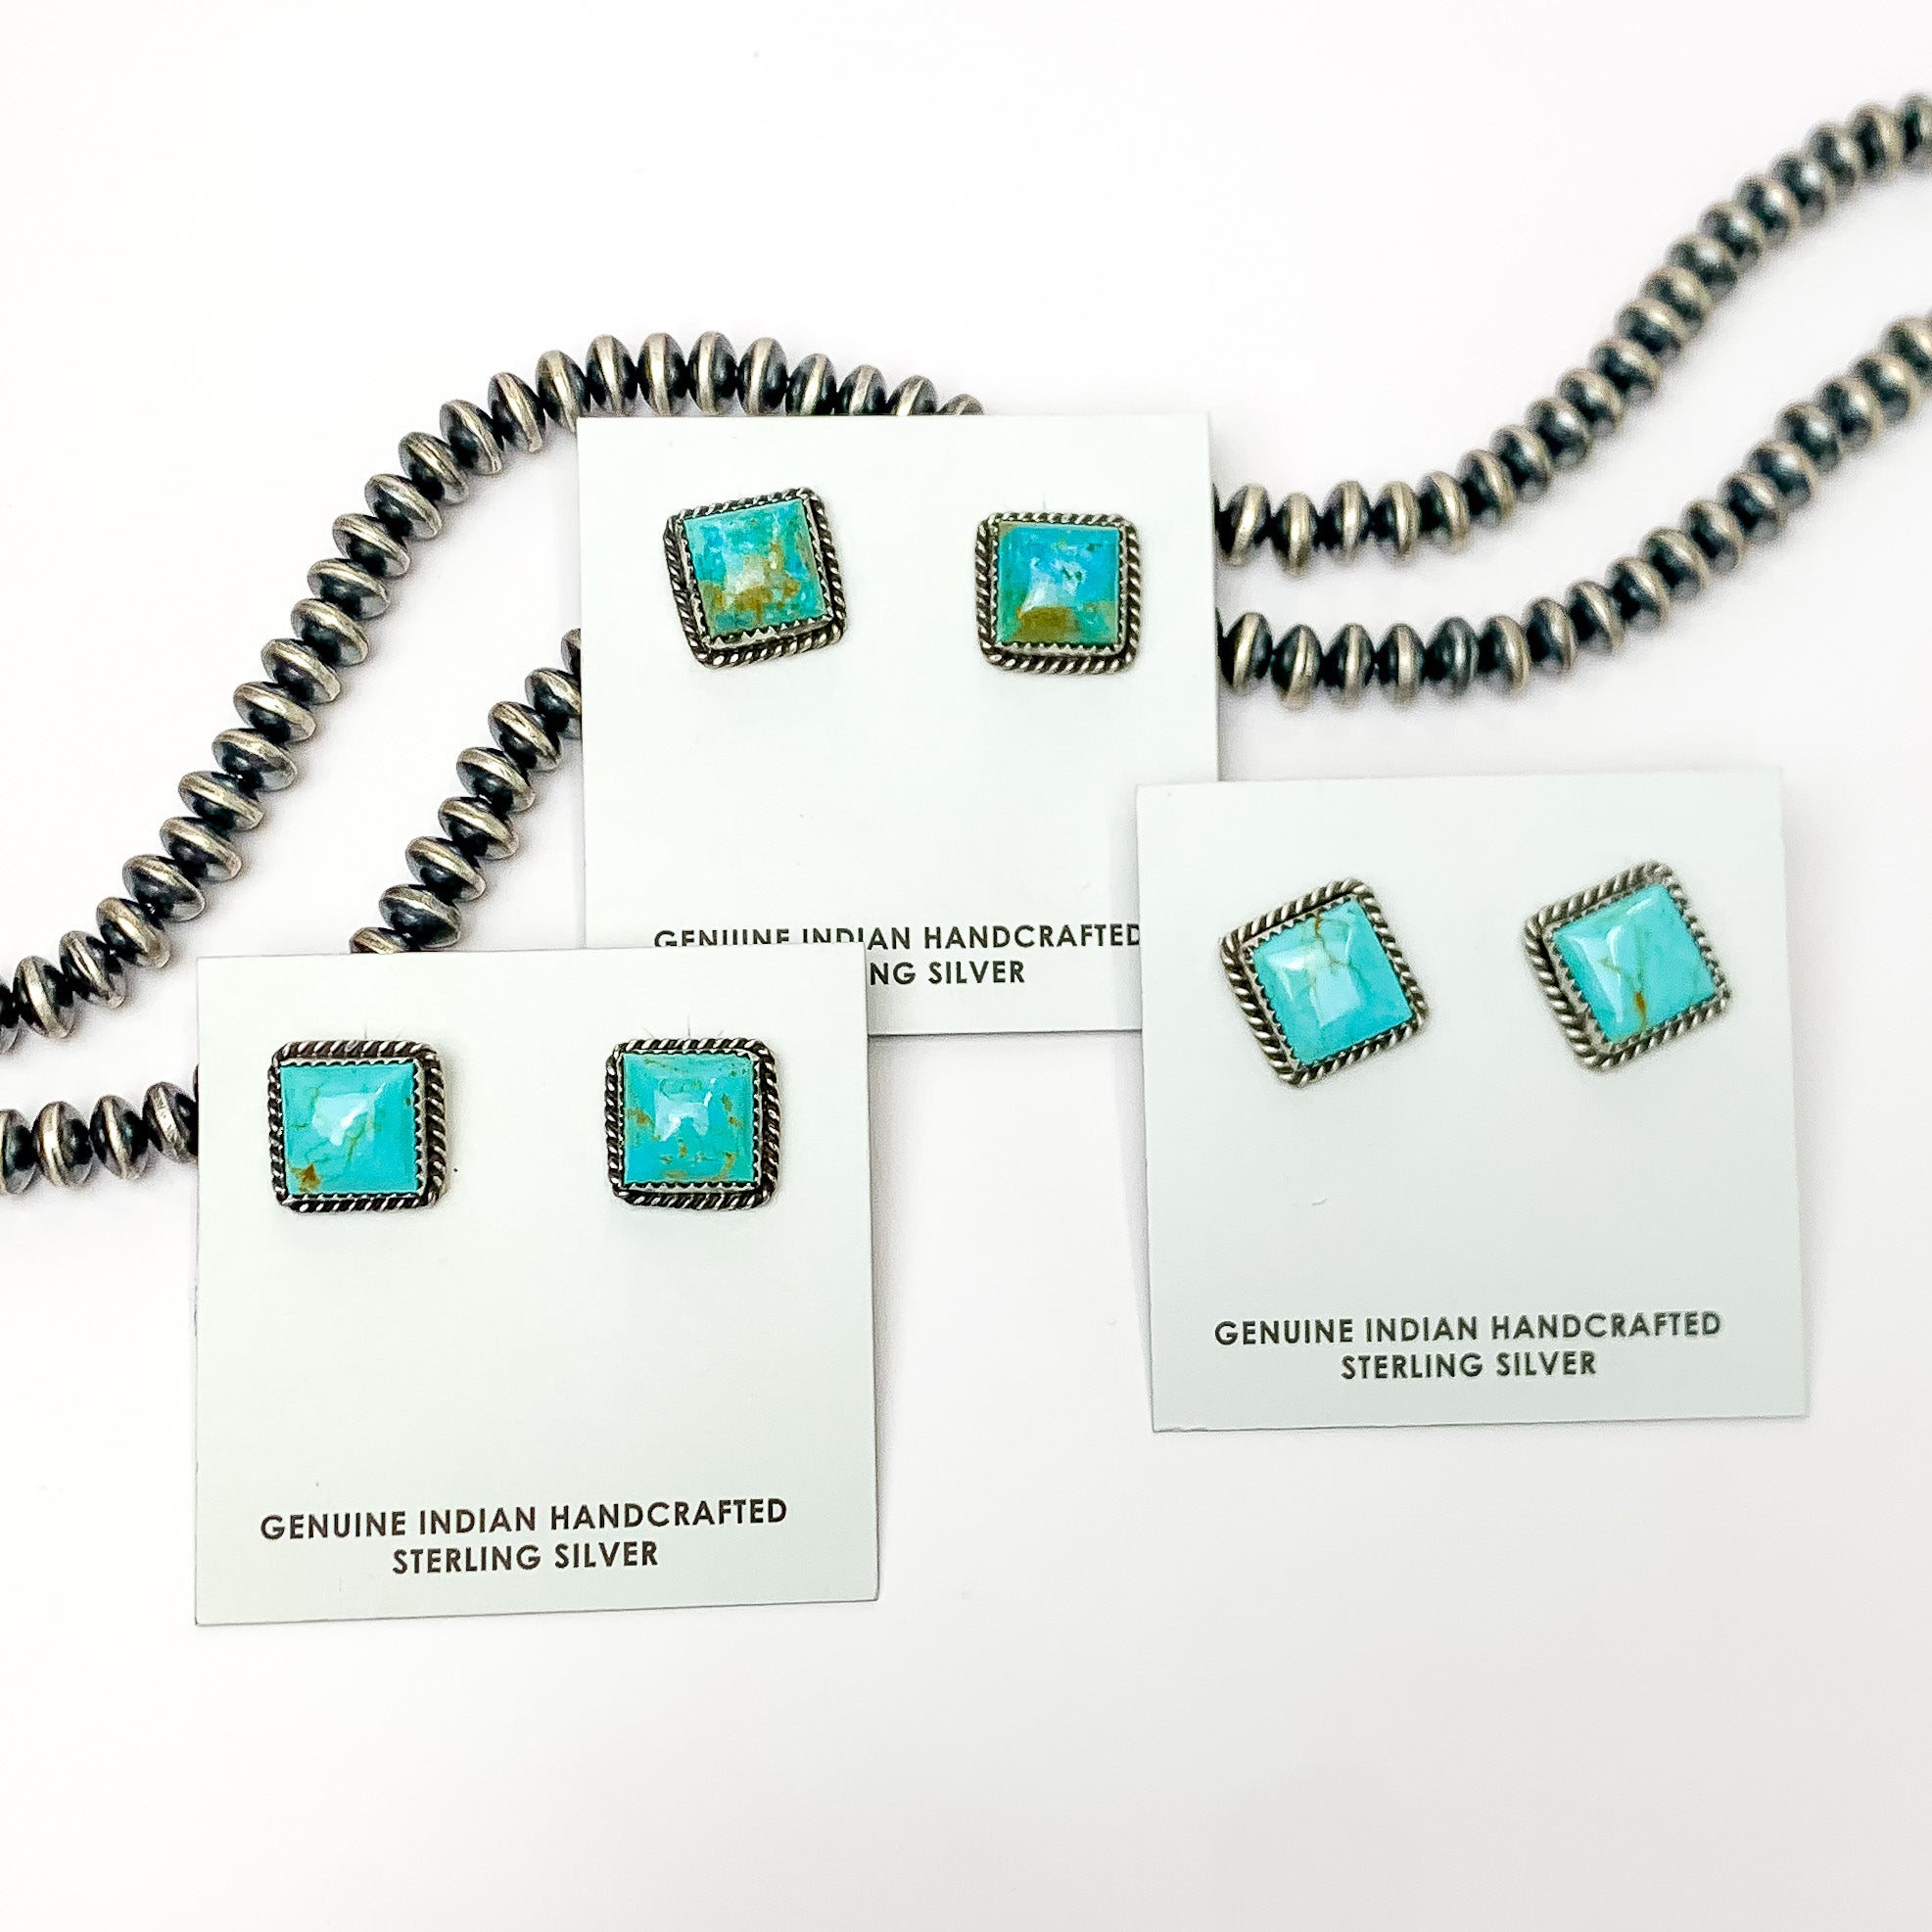 Pictured are three pairs of square, turquoise stud earrings on white earring holders. These earrings are pictured in front of silver beads on a white background. 